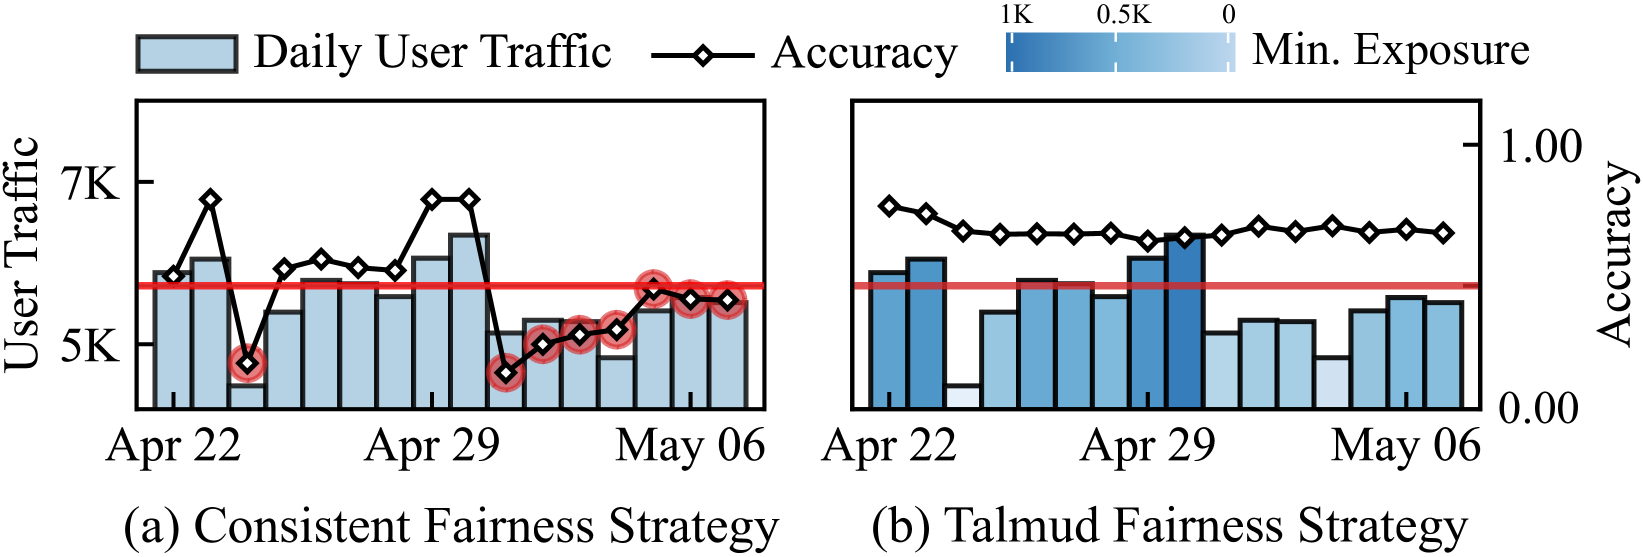 BankFair: Balancing Accuracy and Fairness under Varying User Traffic in Recommender System